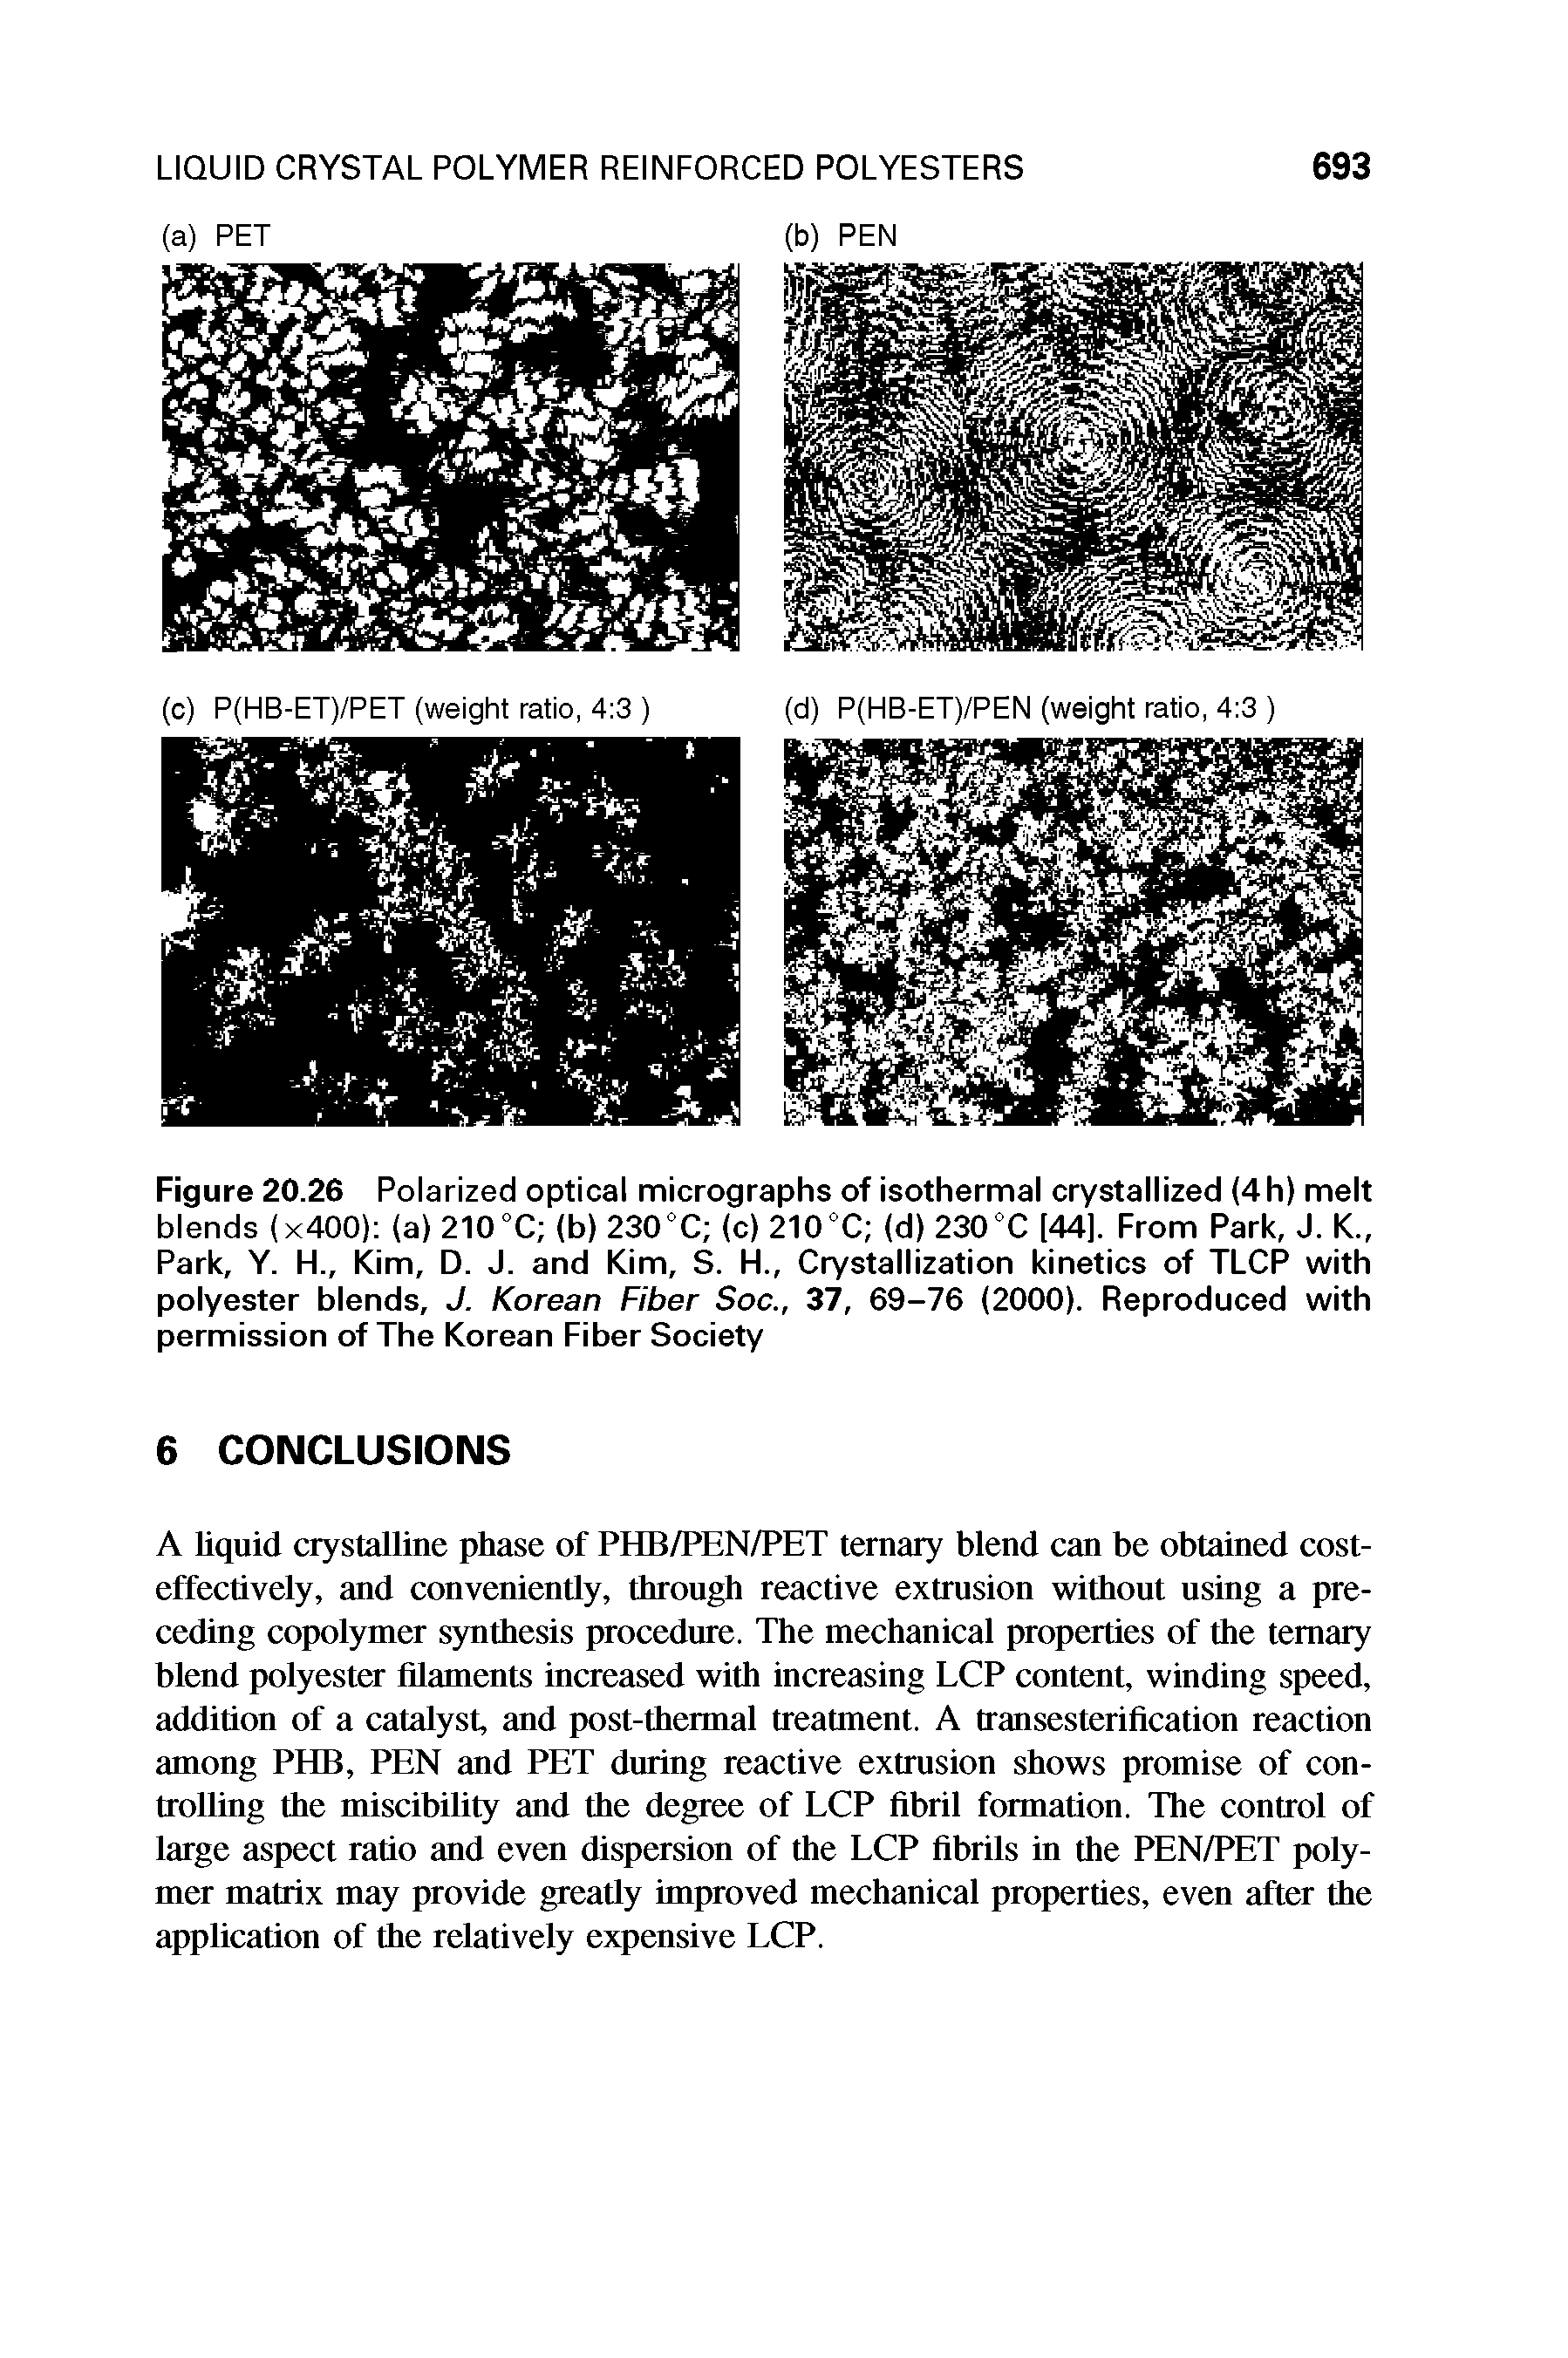 Figure 20.26 Polarized optical micrographs of isothermal crystallized (4h) melt blends (x400) (a) 210°C (b) 230°C (c) 210°C (d) 230°C [44], From Park, J. K Park, Y. H., Kim, D. J. and Kim, S. H., Crystallization kinetics of TLCP with polyester blends, J. Korean Fiber Soc., 37, 69-76 (2000). Reproduced with permission of The Korean Fiber Society...